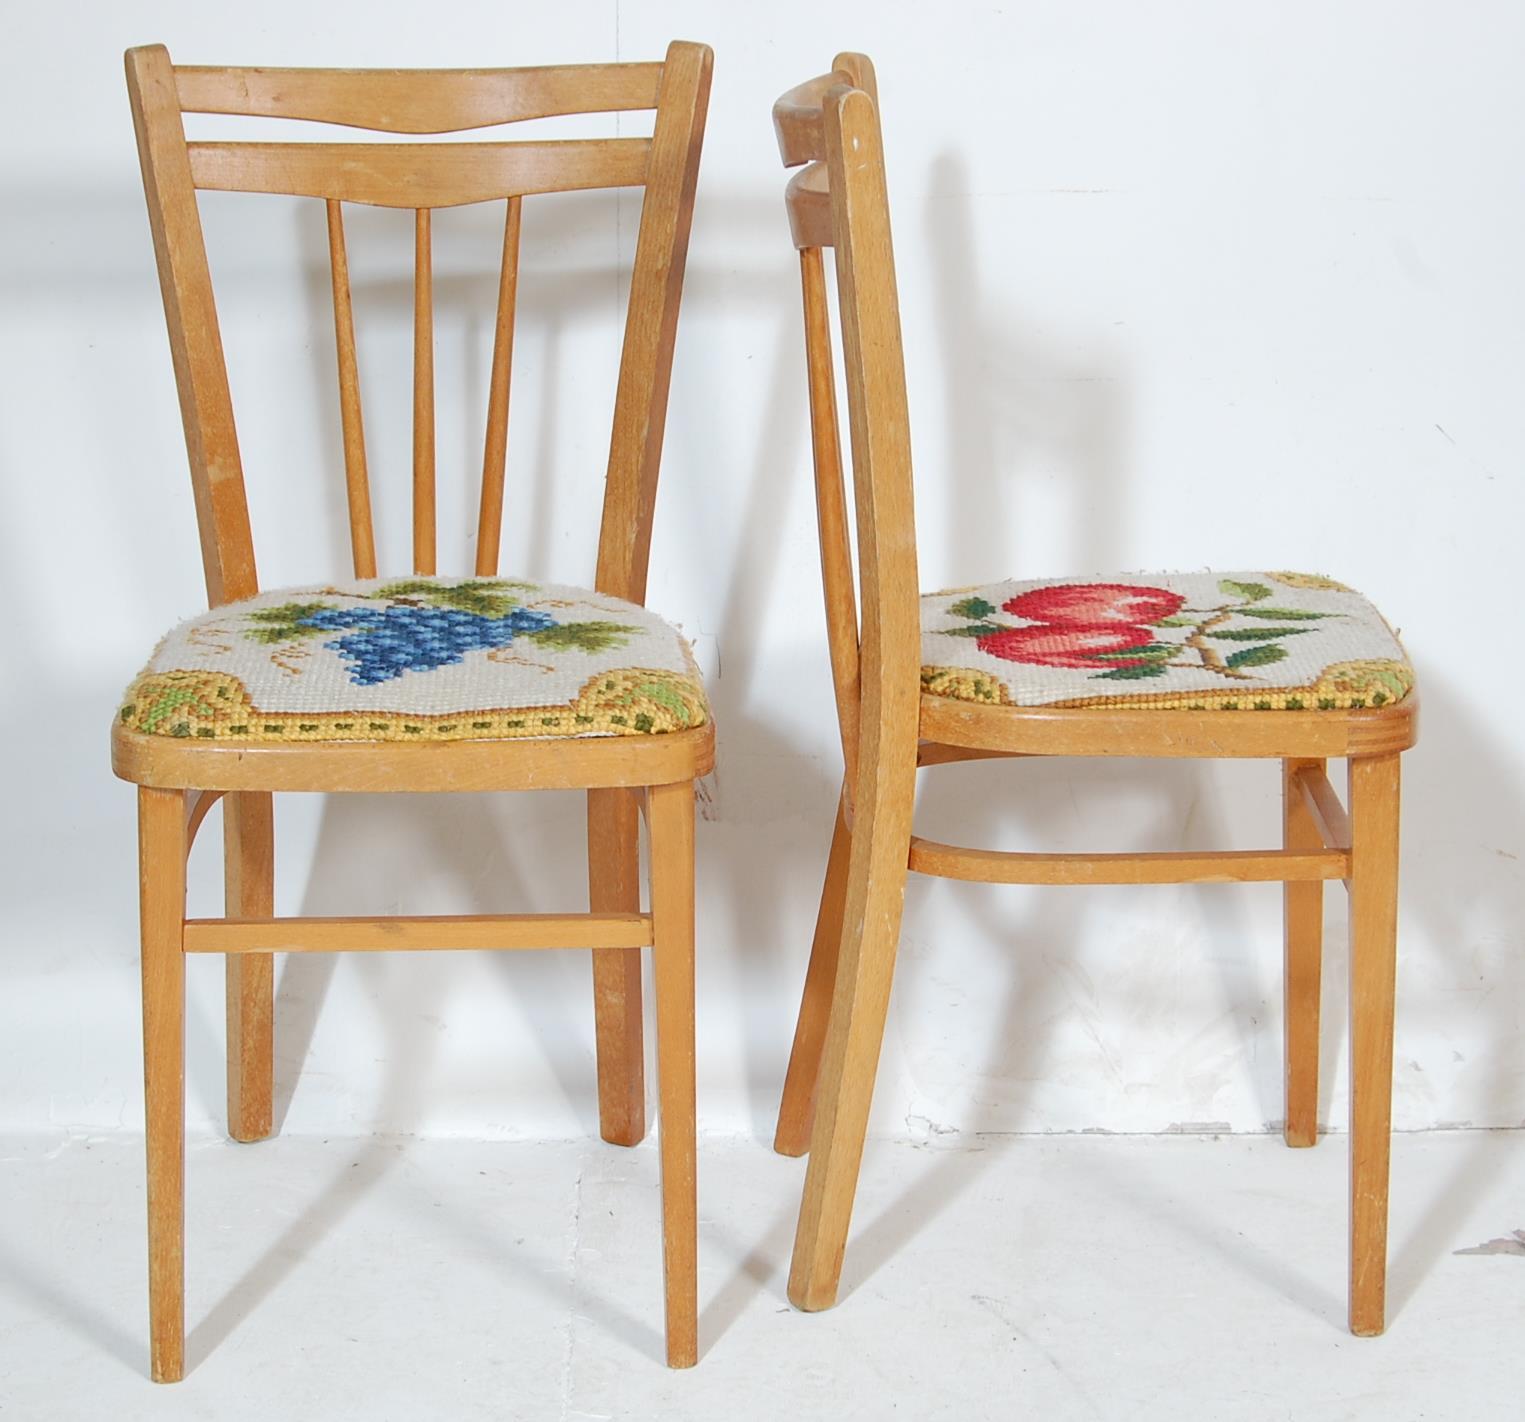 FIVE RETRO 20TH CENTURY DINING CHAIRS / KITCHEN CHAIRS - Image 4 of 5